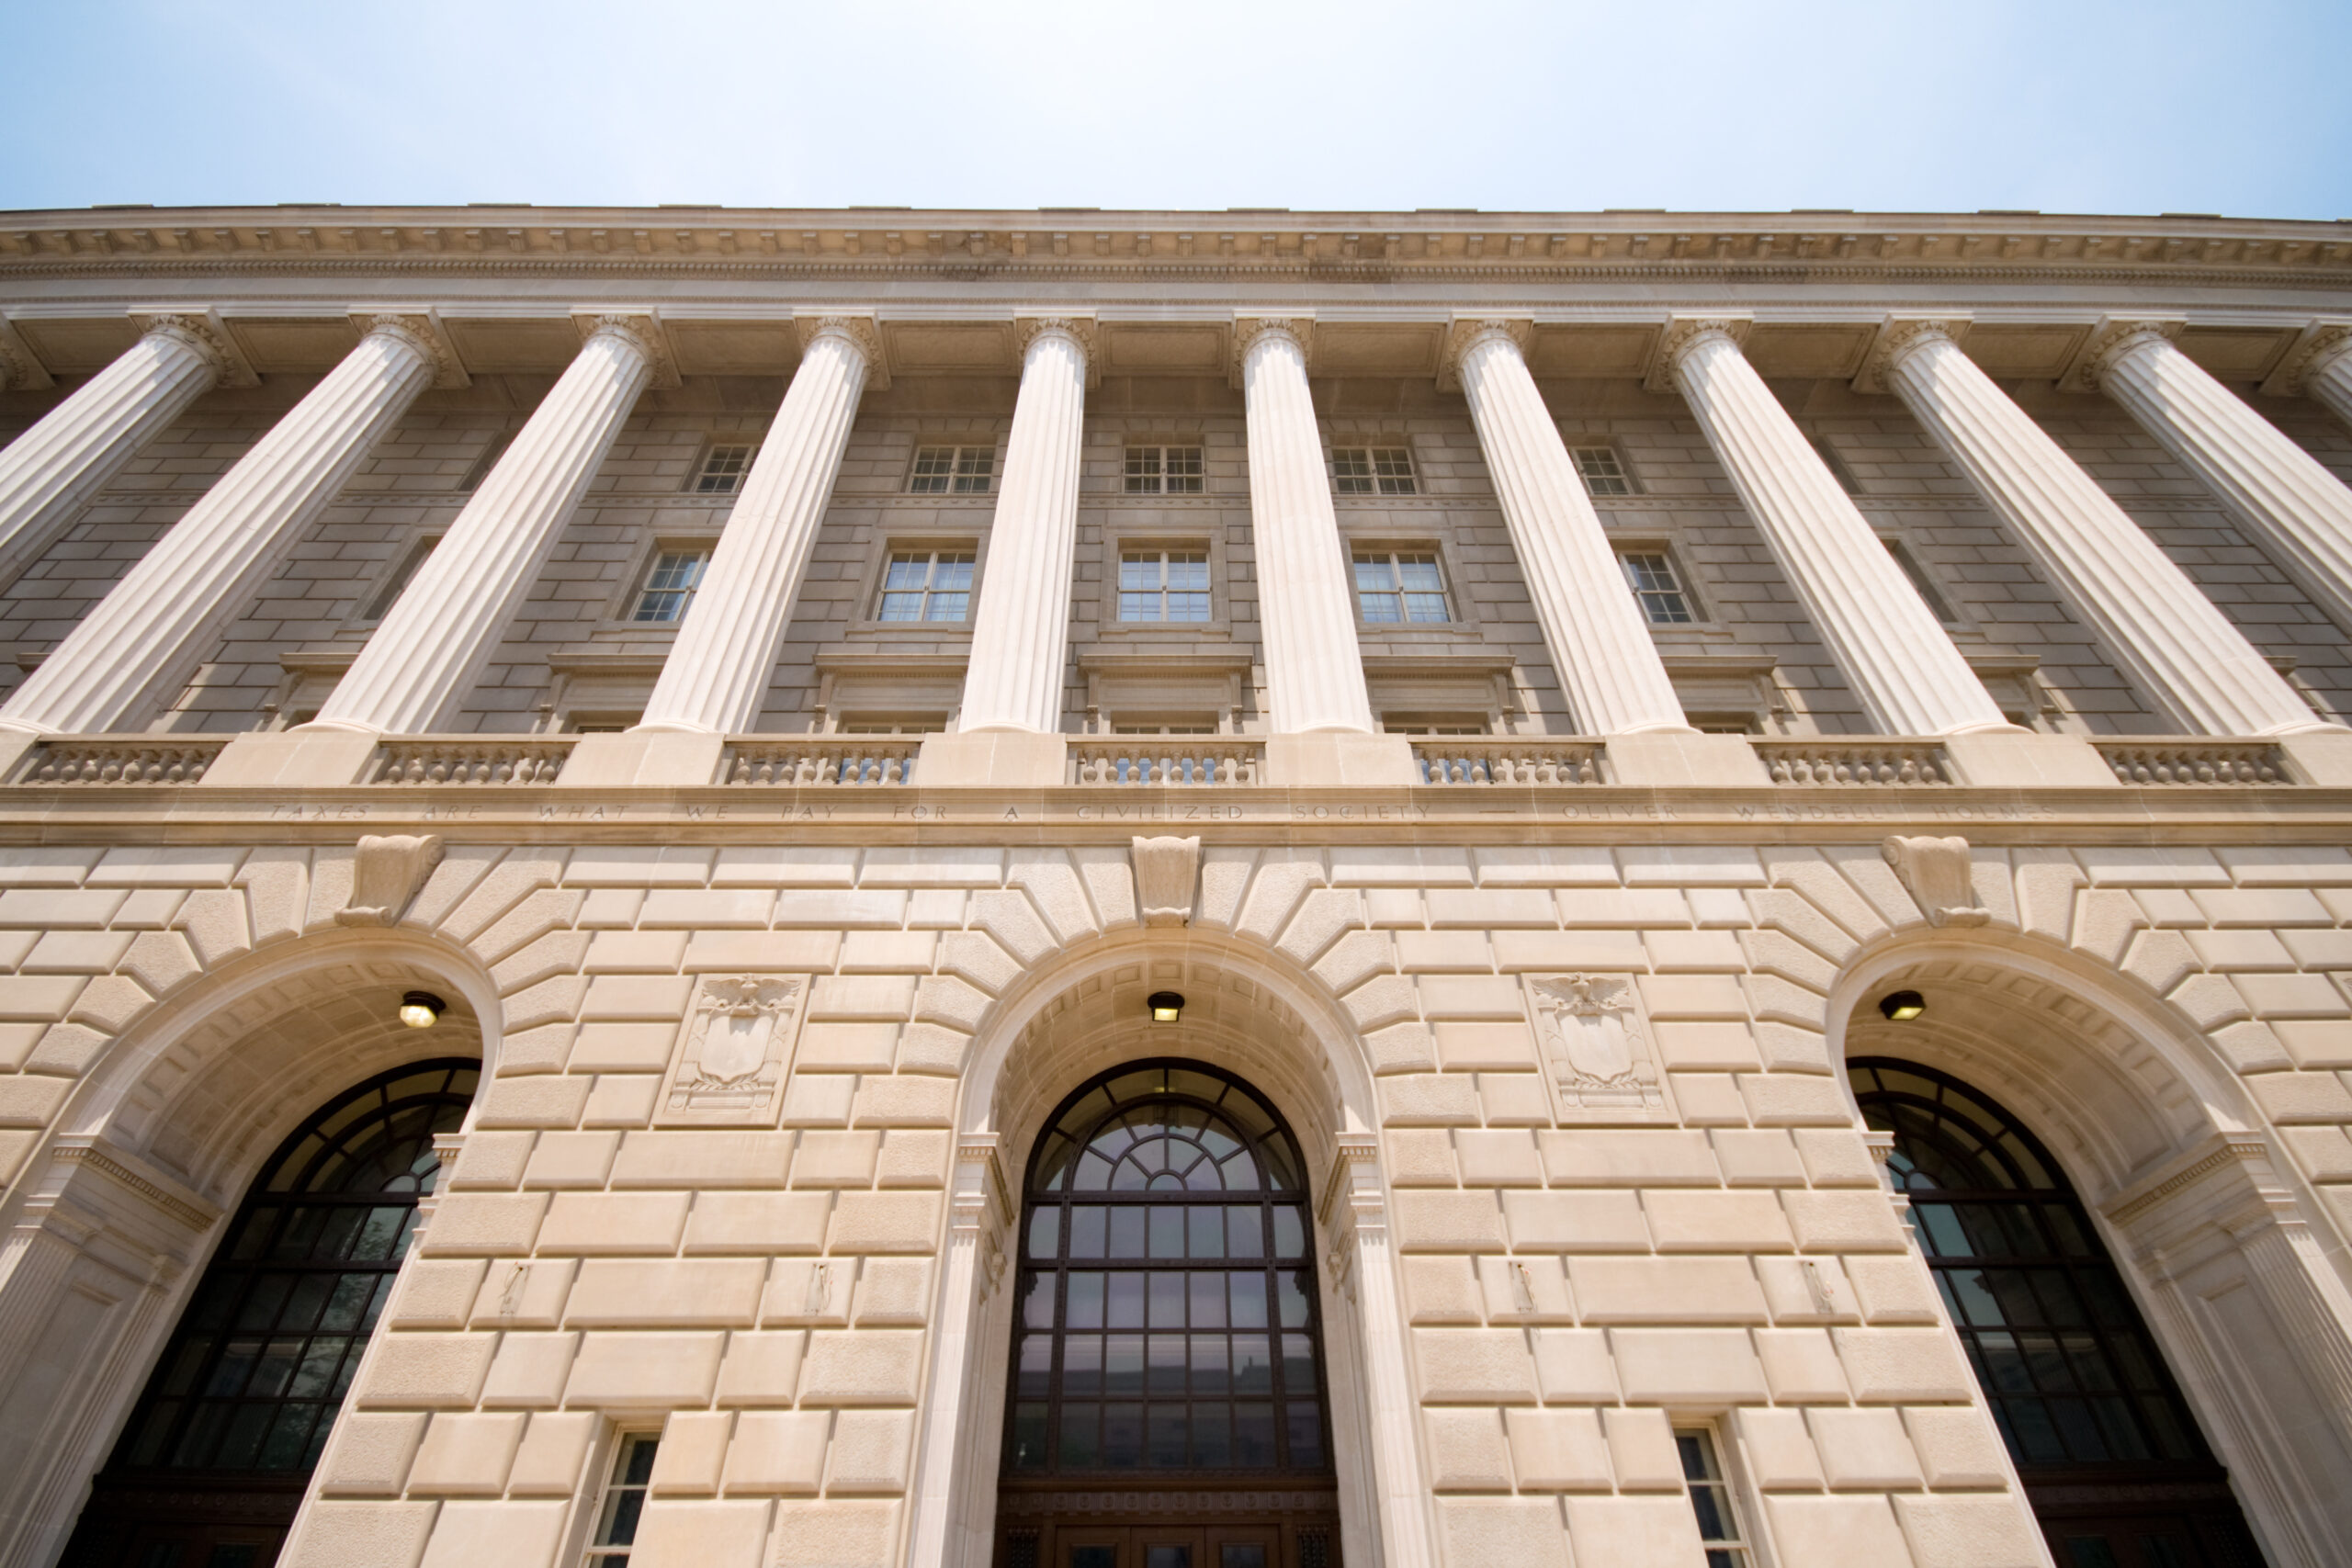 A low angle image of the Internal Revenue Service building in Washington, D.C. It has tan brick with large archways and many columns, stretching up into a blue sky.